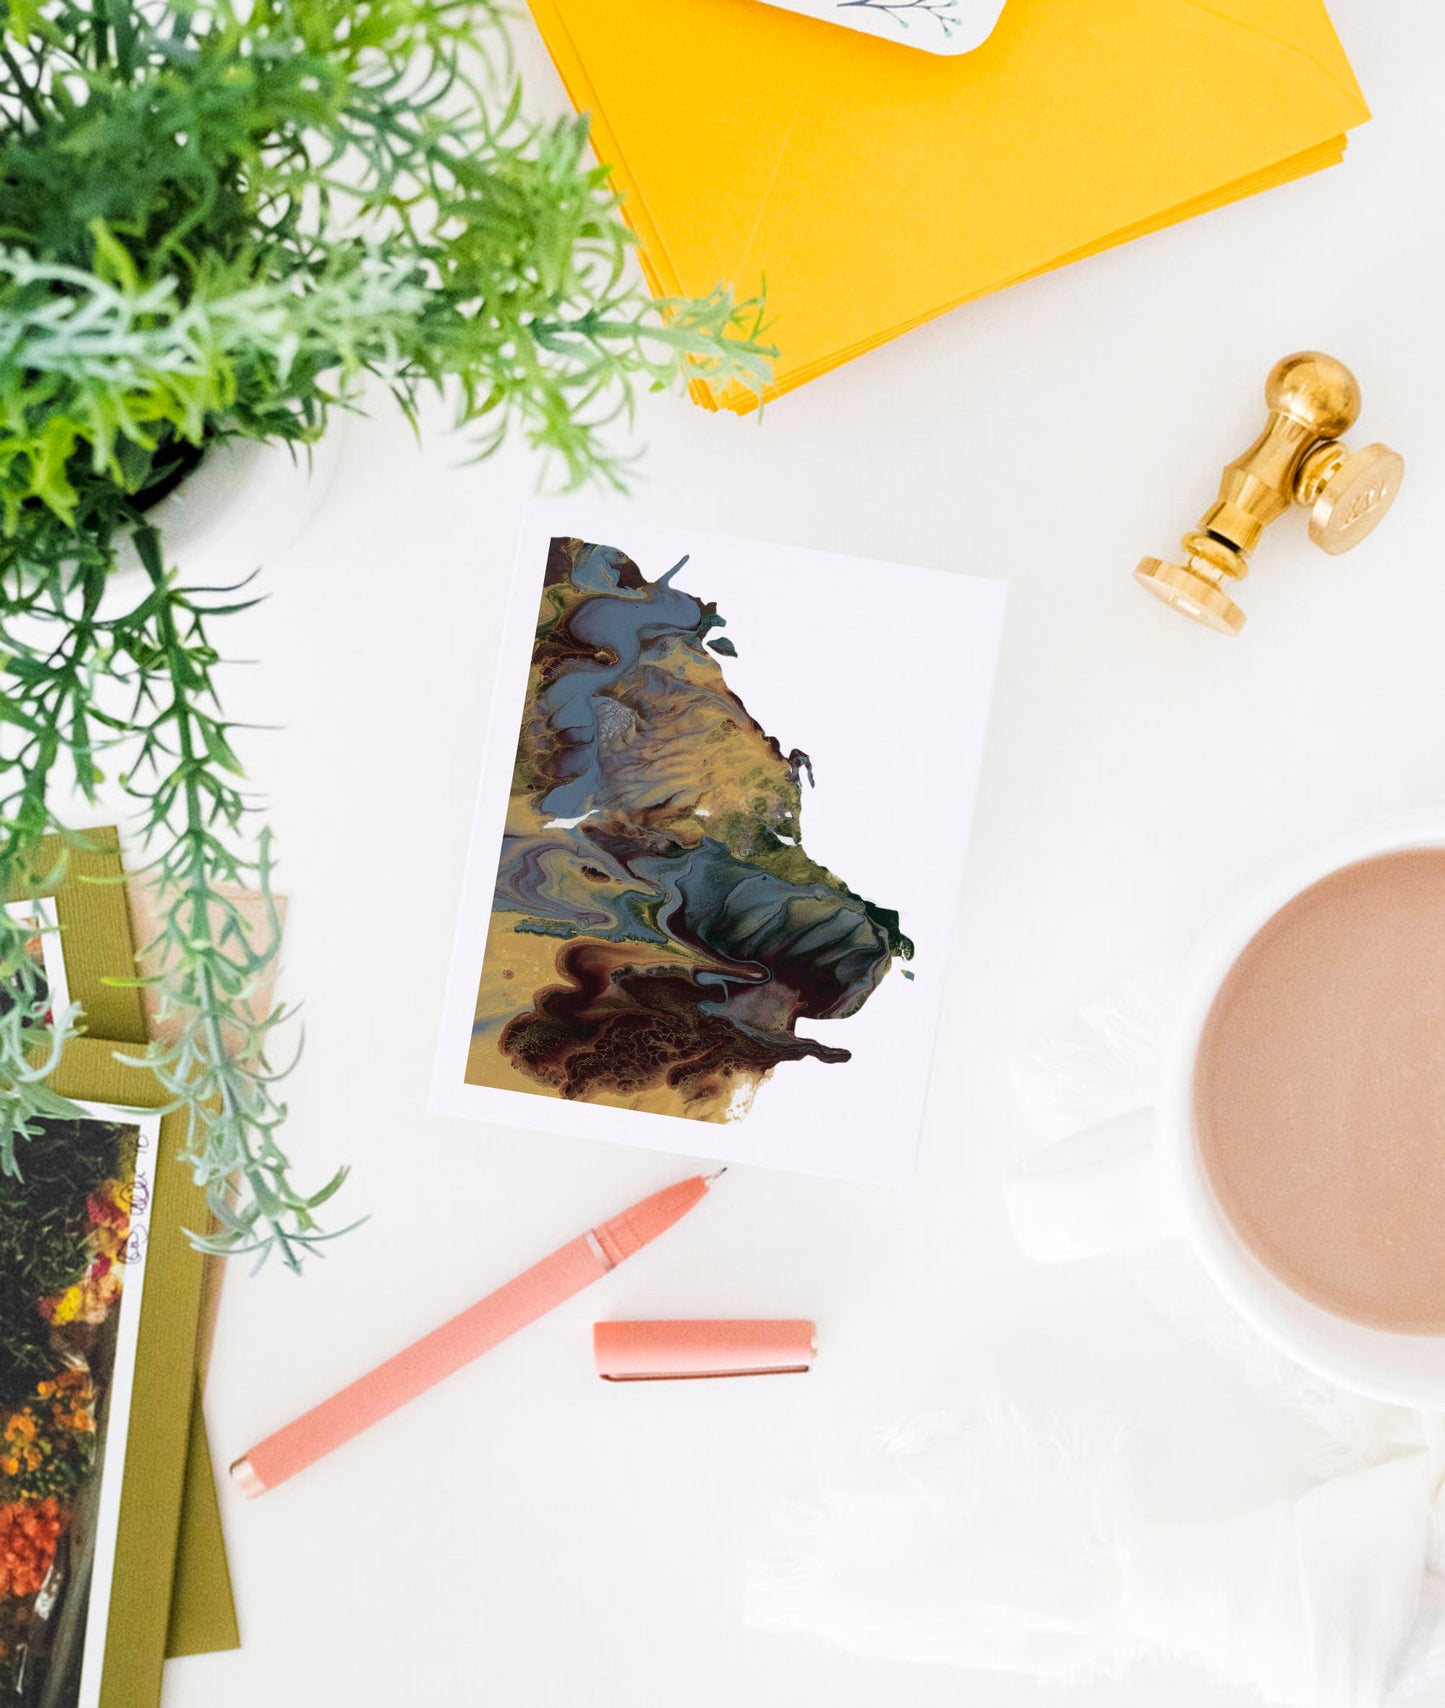 Greeting card showing an abstract painting in golds, dusty blues, and browns created from squishing acrylic paint between pieces of cardboard. It sits on a white background amongst a green plant,  a stack of yellow envelopes, a pink pen, a gold wax seal, and a white mug filled with coffee.